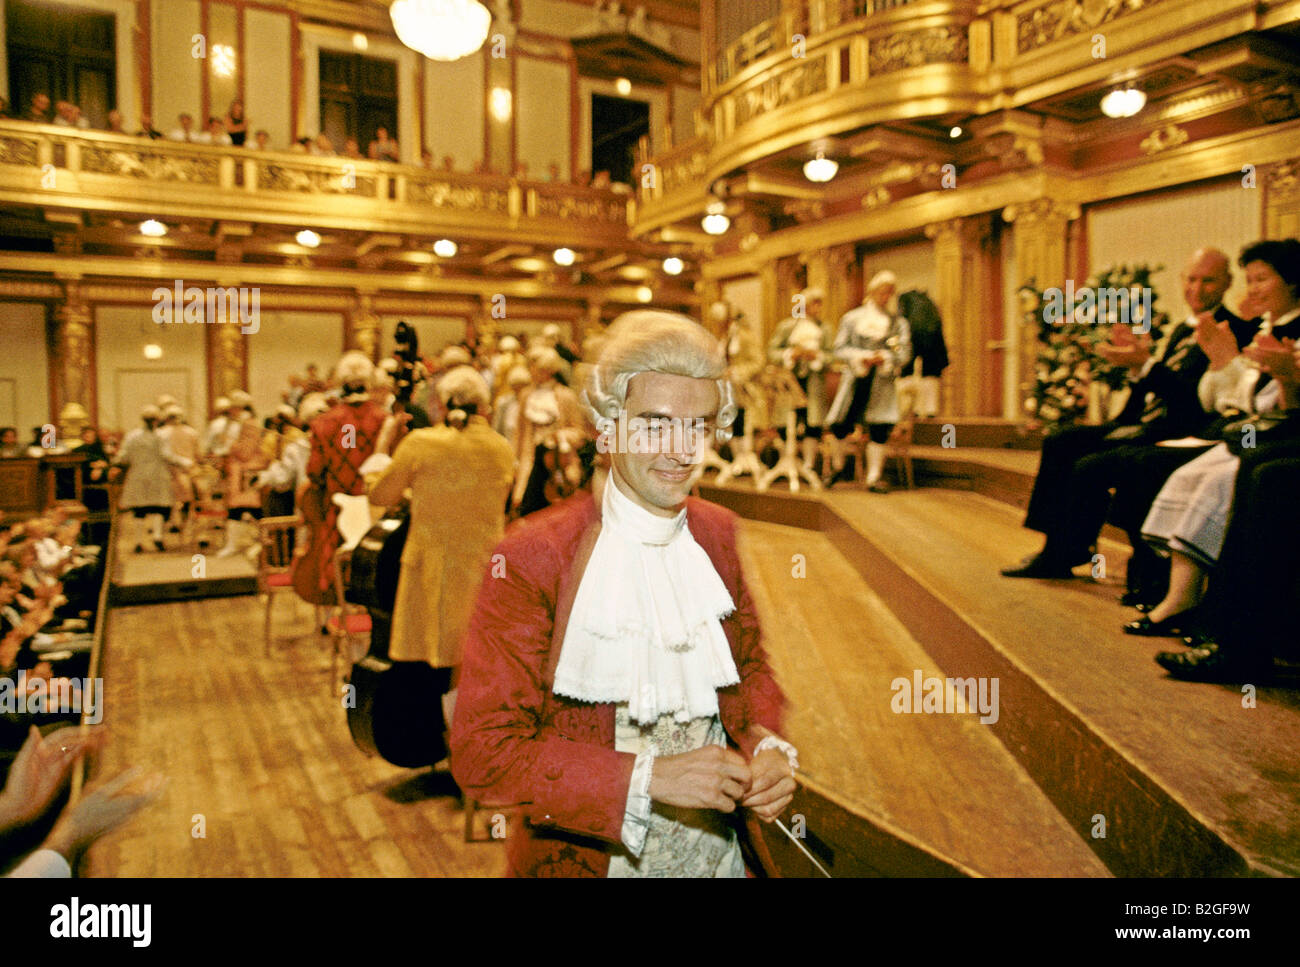 THE CONDUCTOR OF THE MOZART PLAYERS IN PERIOD COSTUME LEAVES THE STAGE TO APPLAUSE AFTER PERFORMING A MOZART CONCERT Iin vienna Stock Photo